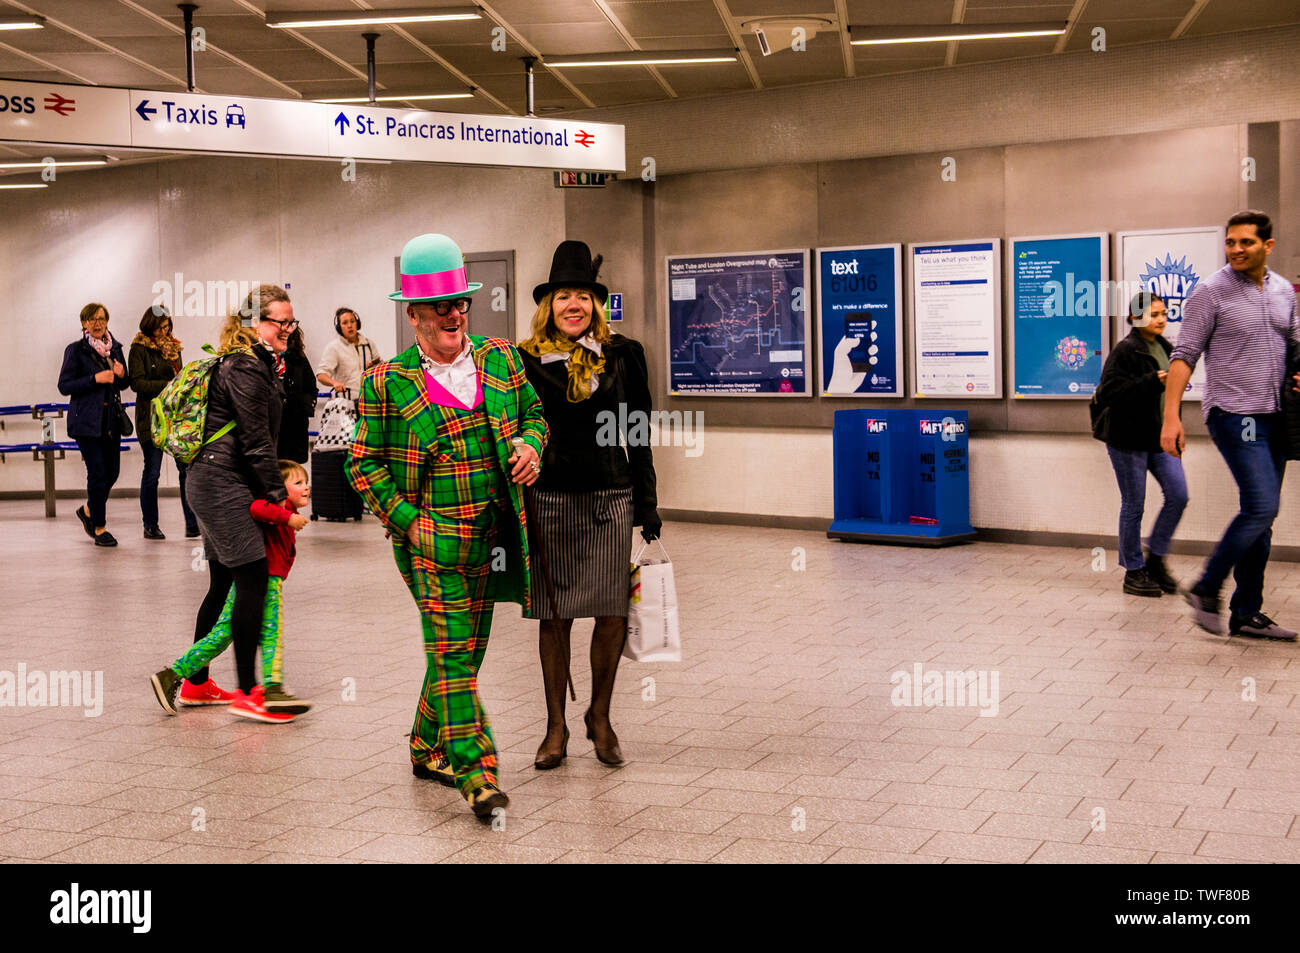 Couple dressed in extravagant clothing walking through Kings Cross underground station in London. Stock Photo